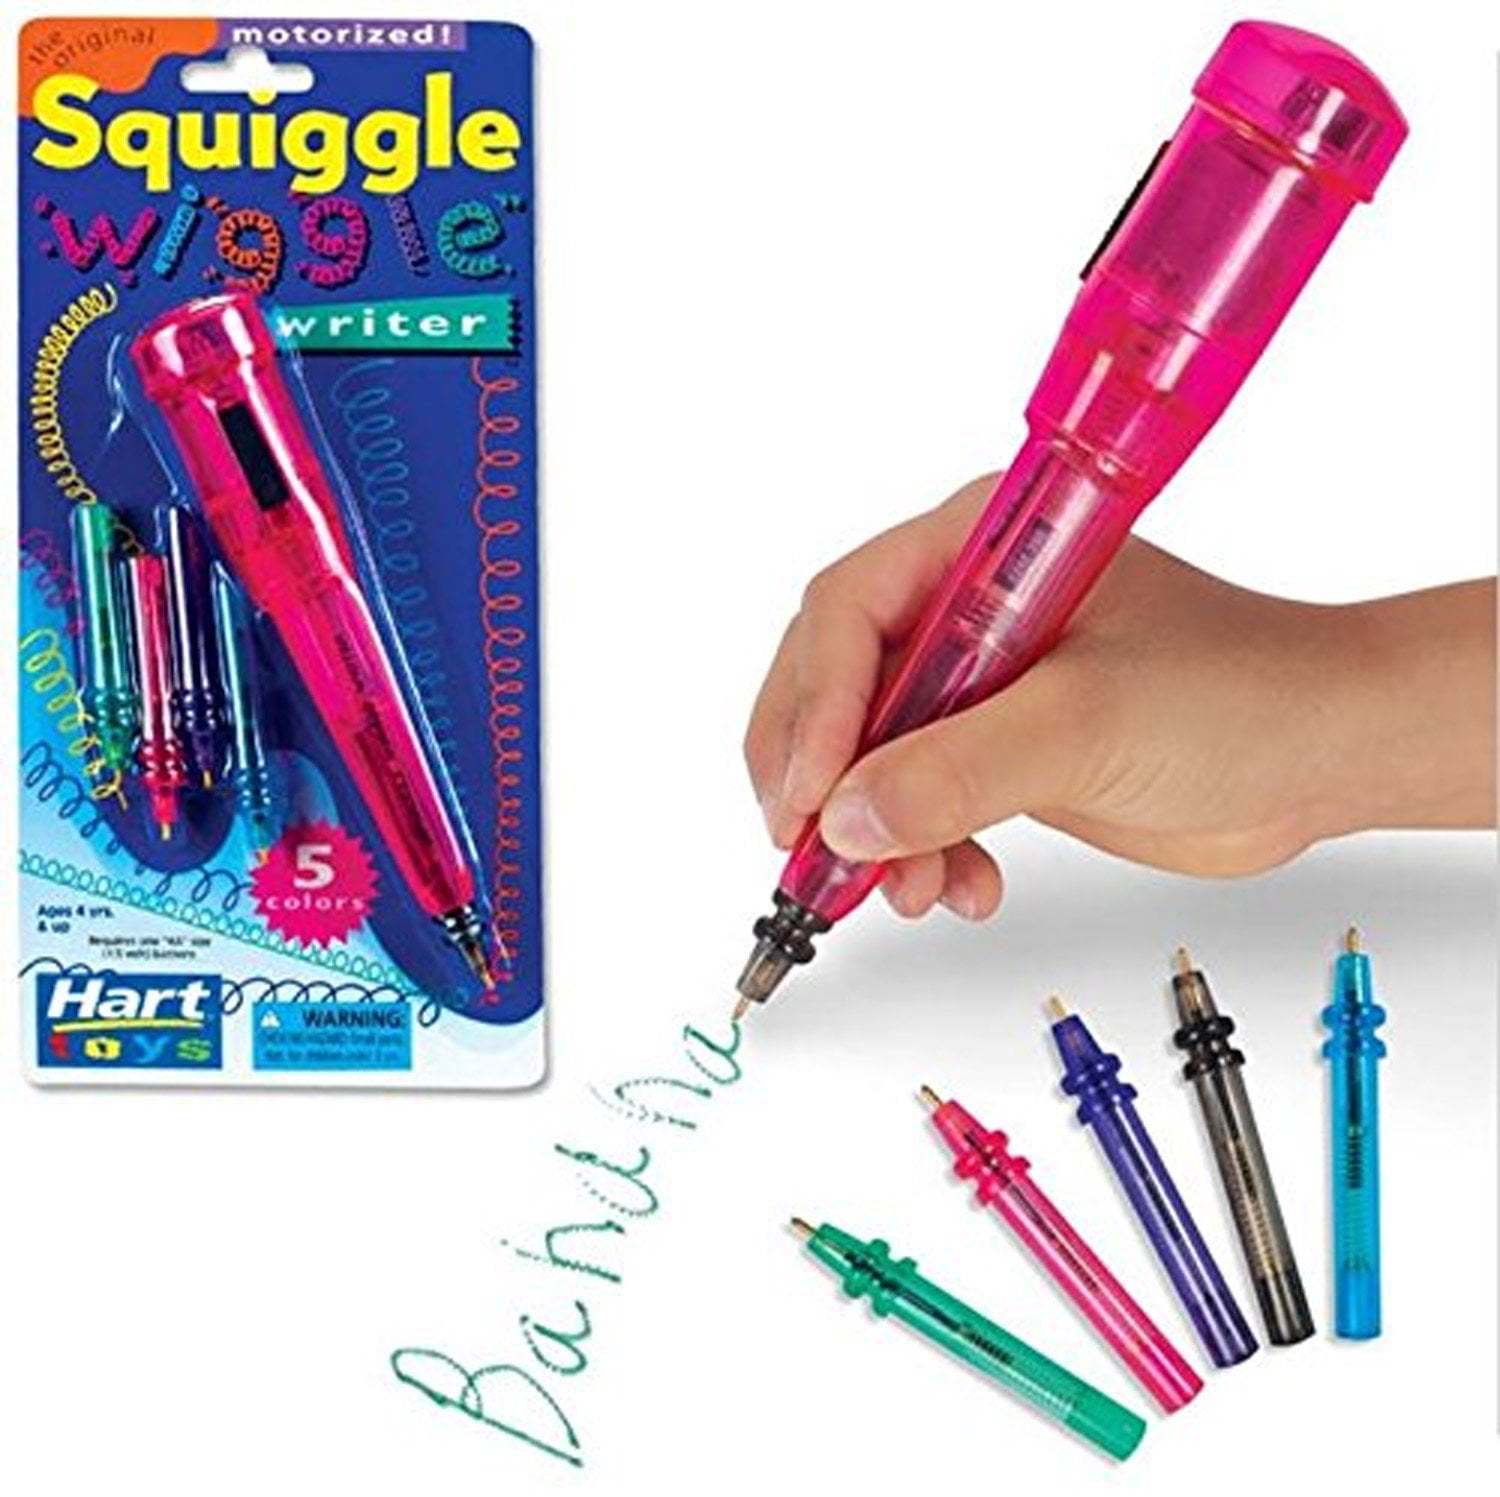 Pack of 4 Hart Toys Squiggle Wiggle Writer Replacement Pen Nibs Assorted 